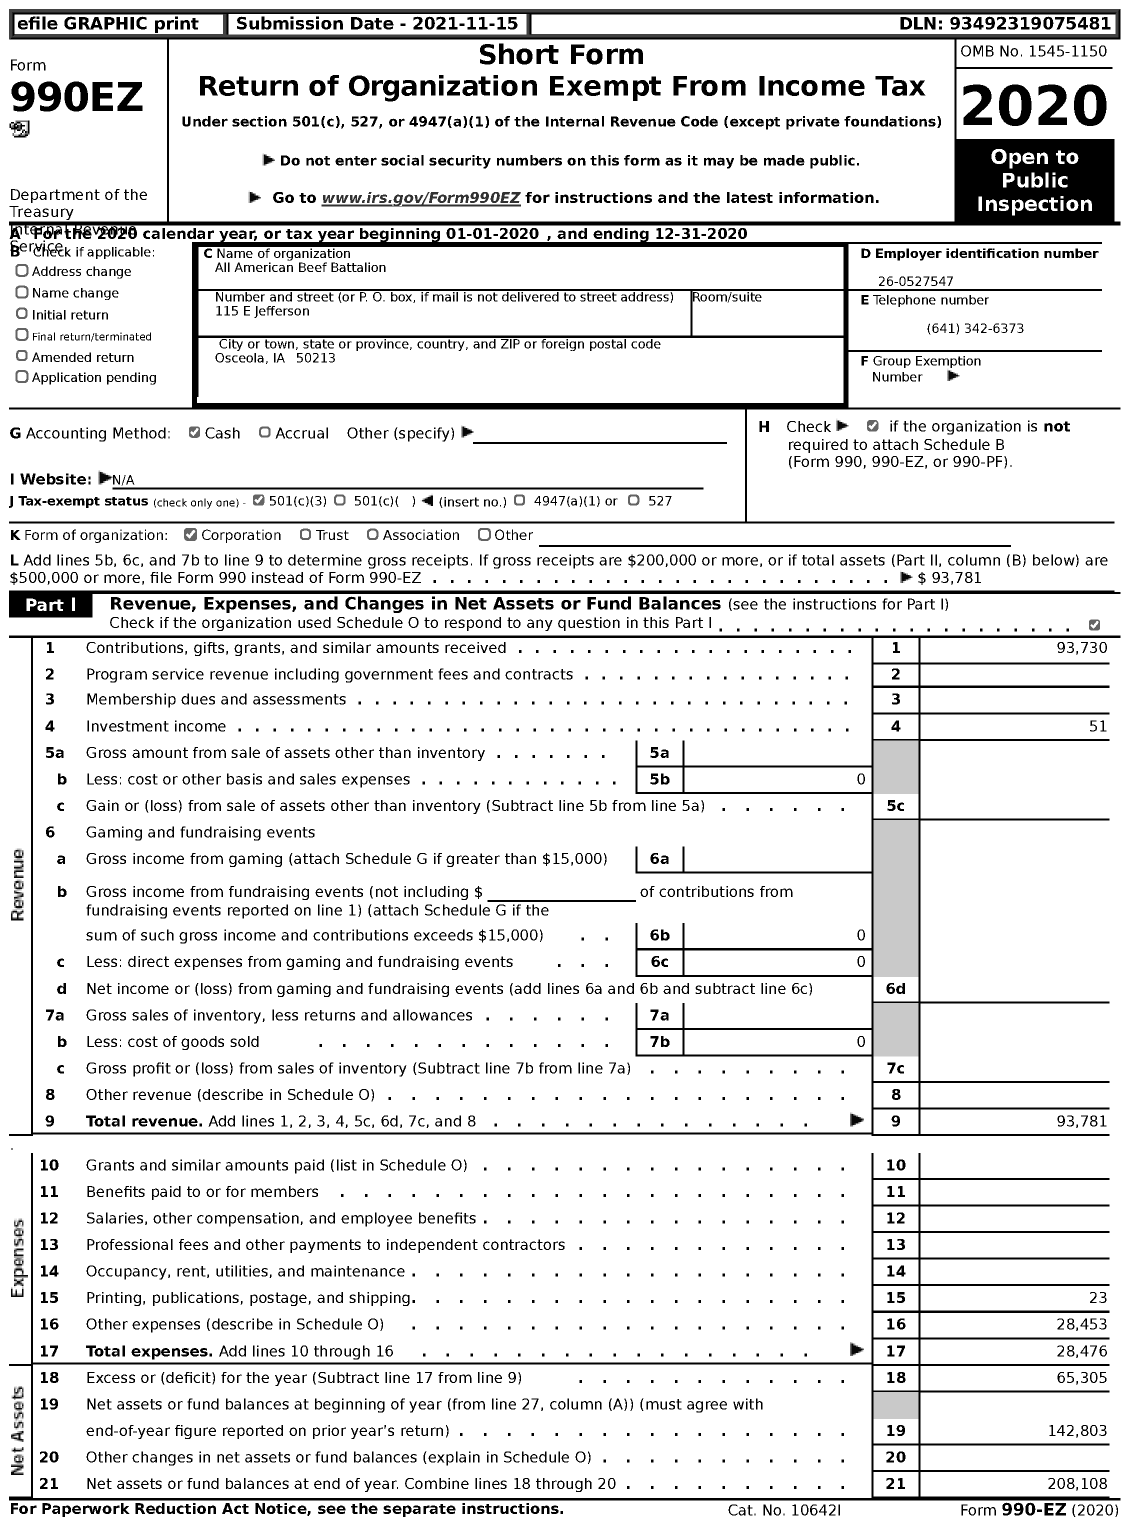 Image of first page of 2020 Form 990EZ for All American Beef Battalion